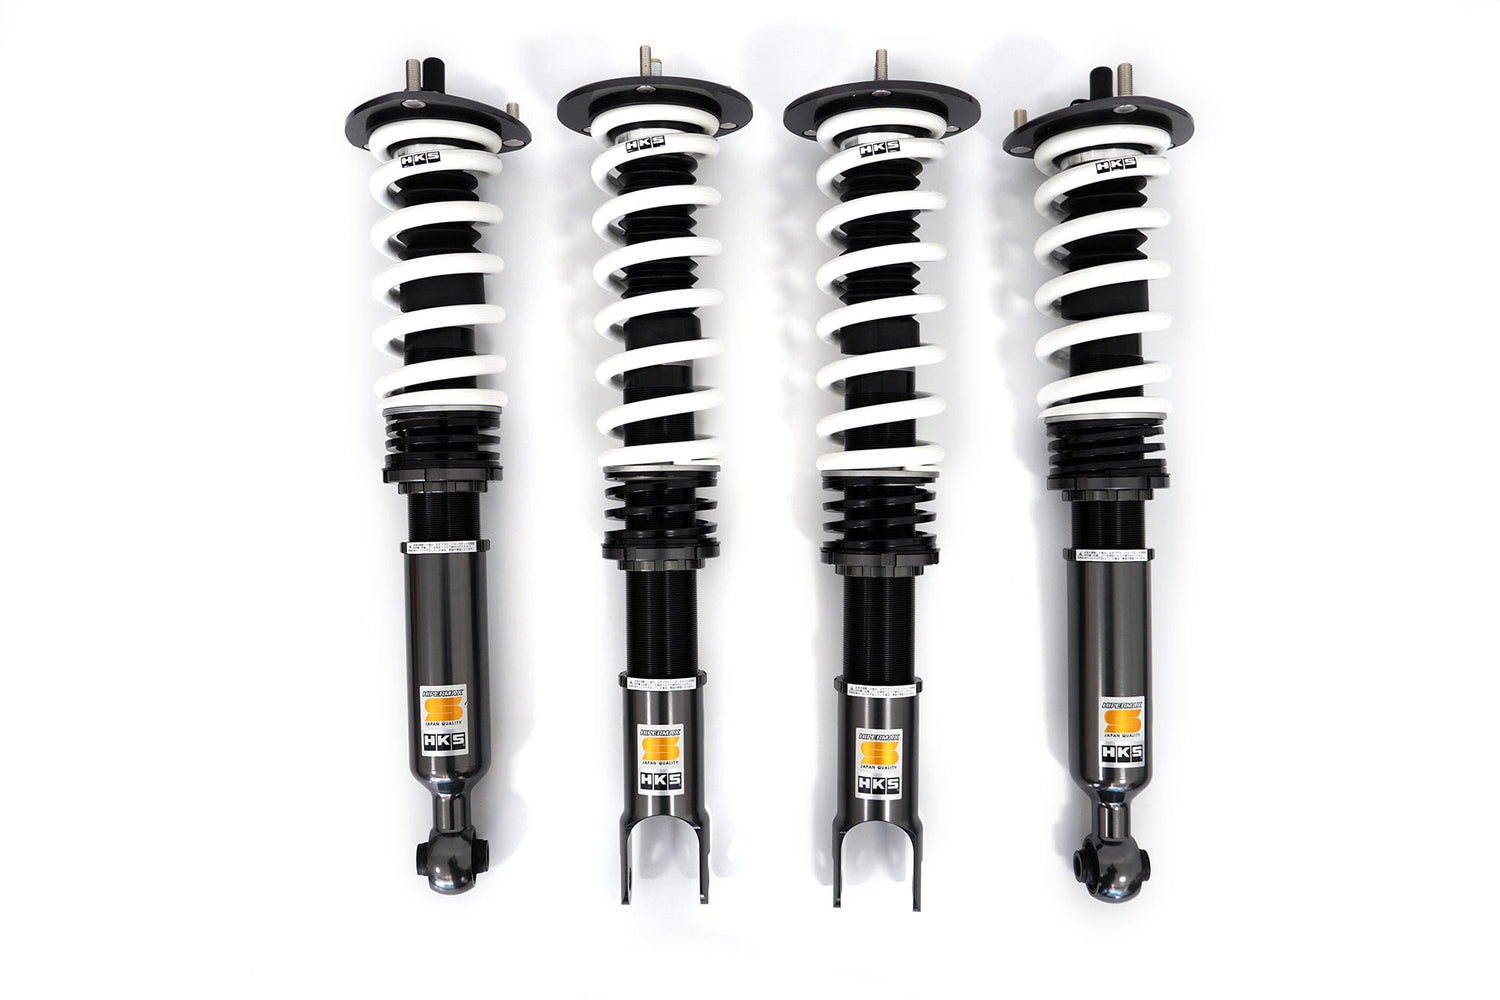 HKS Hipermax S Coilovers for 1993-1998 Toyota Supra (JZA80) 80300-AT010